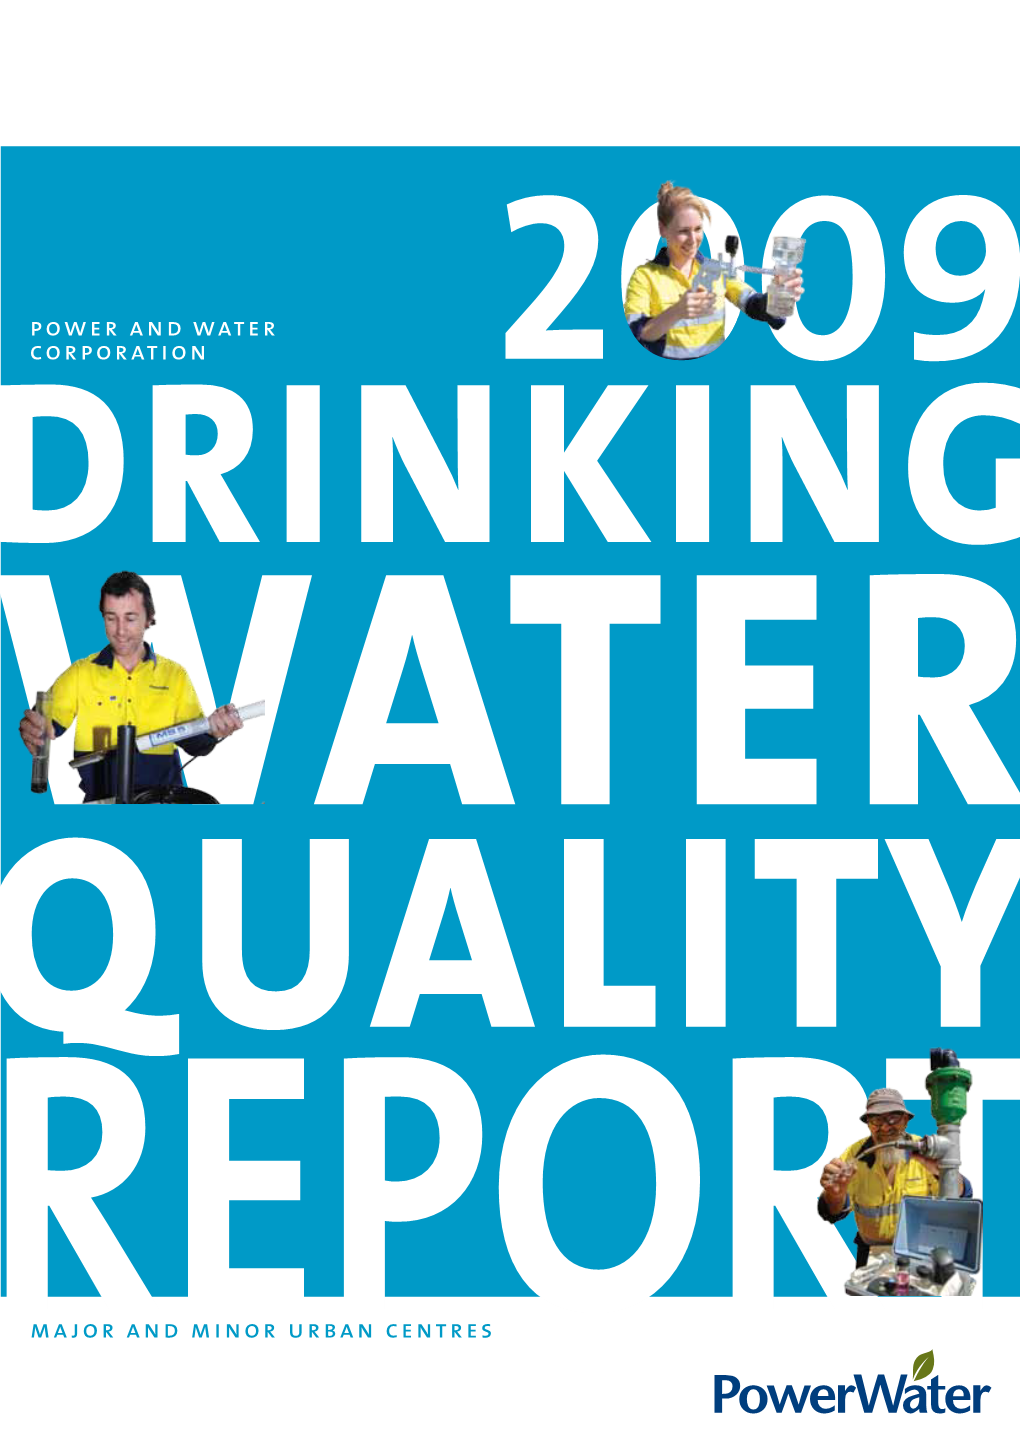 2009 Power and Water Corporation Drinking Water Quality Report